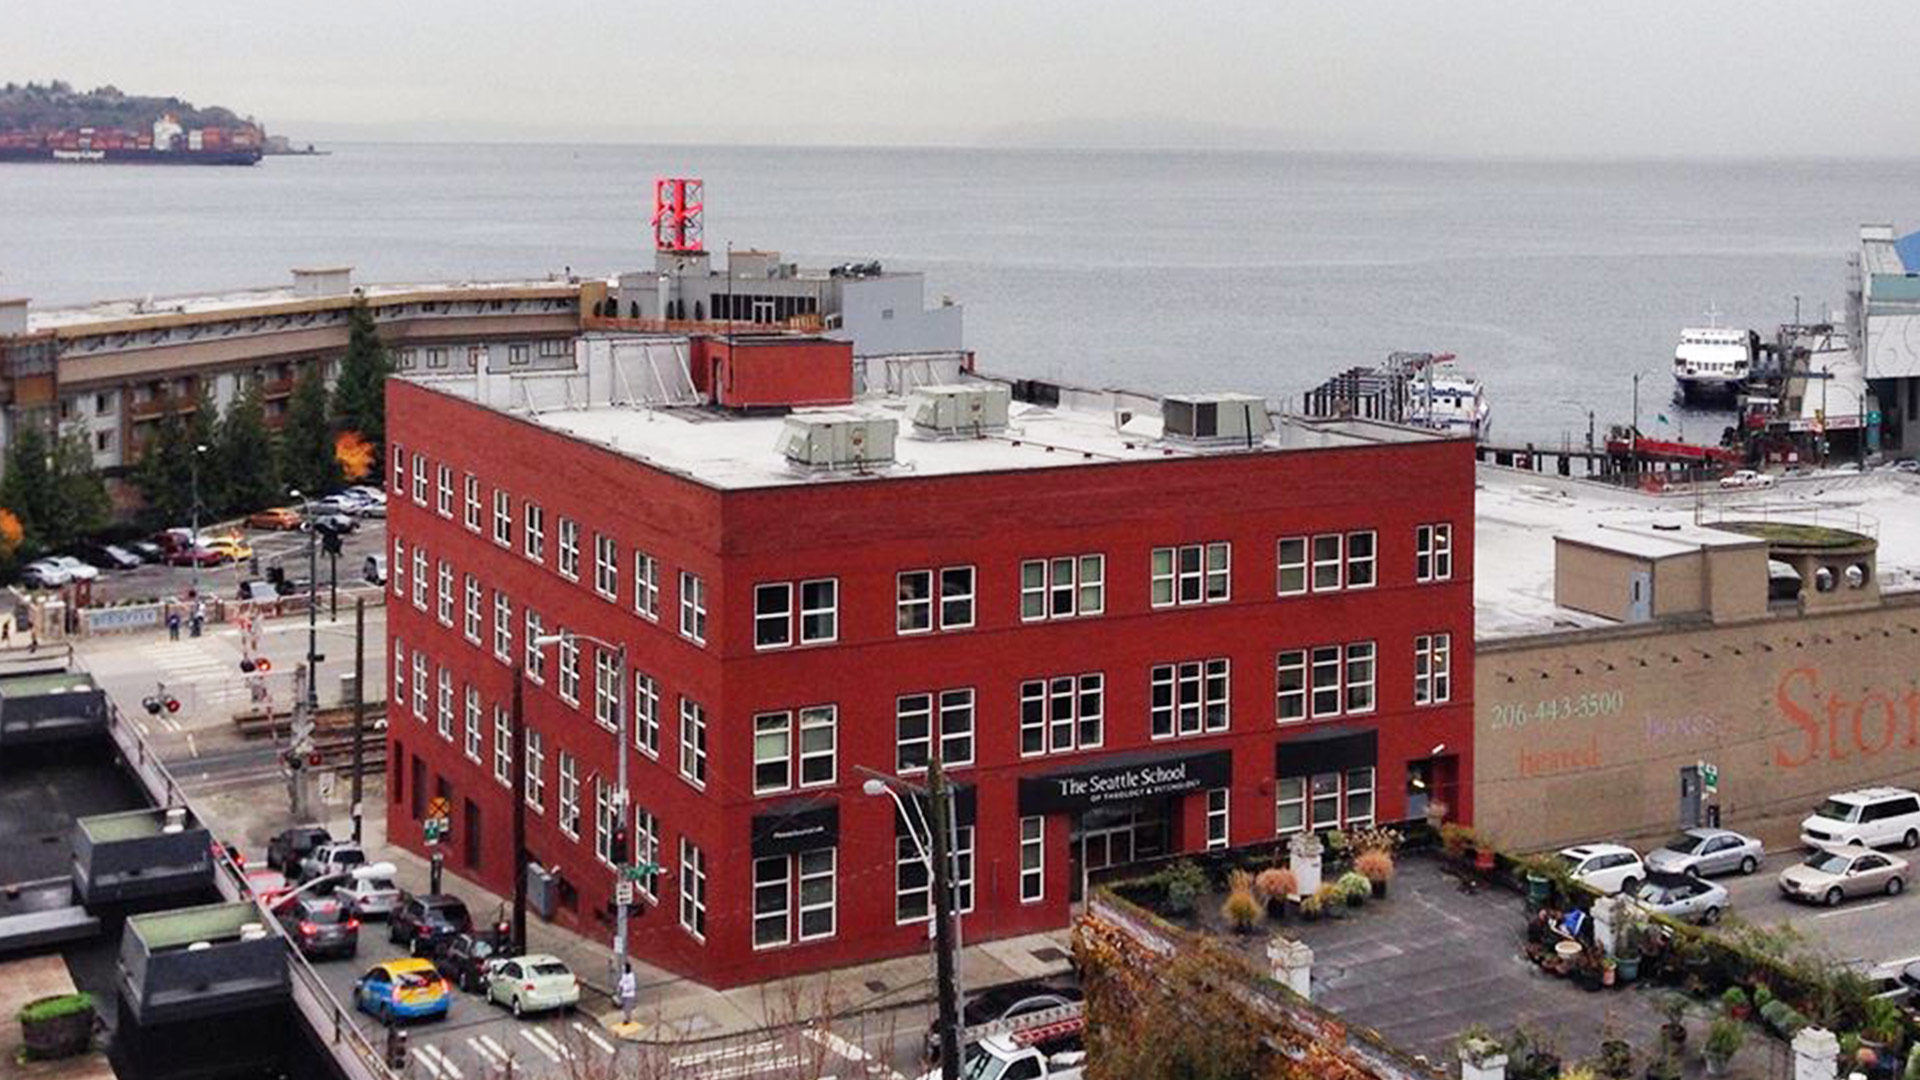 an aerial view of The Seattle School of Theology & Psychology